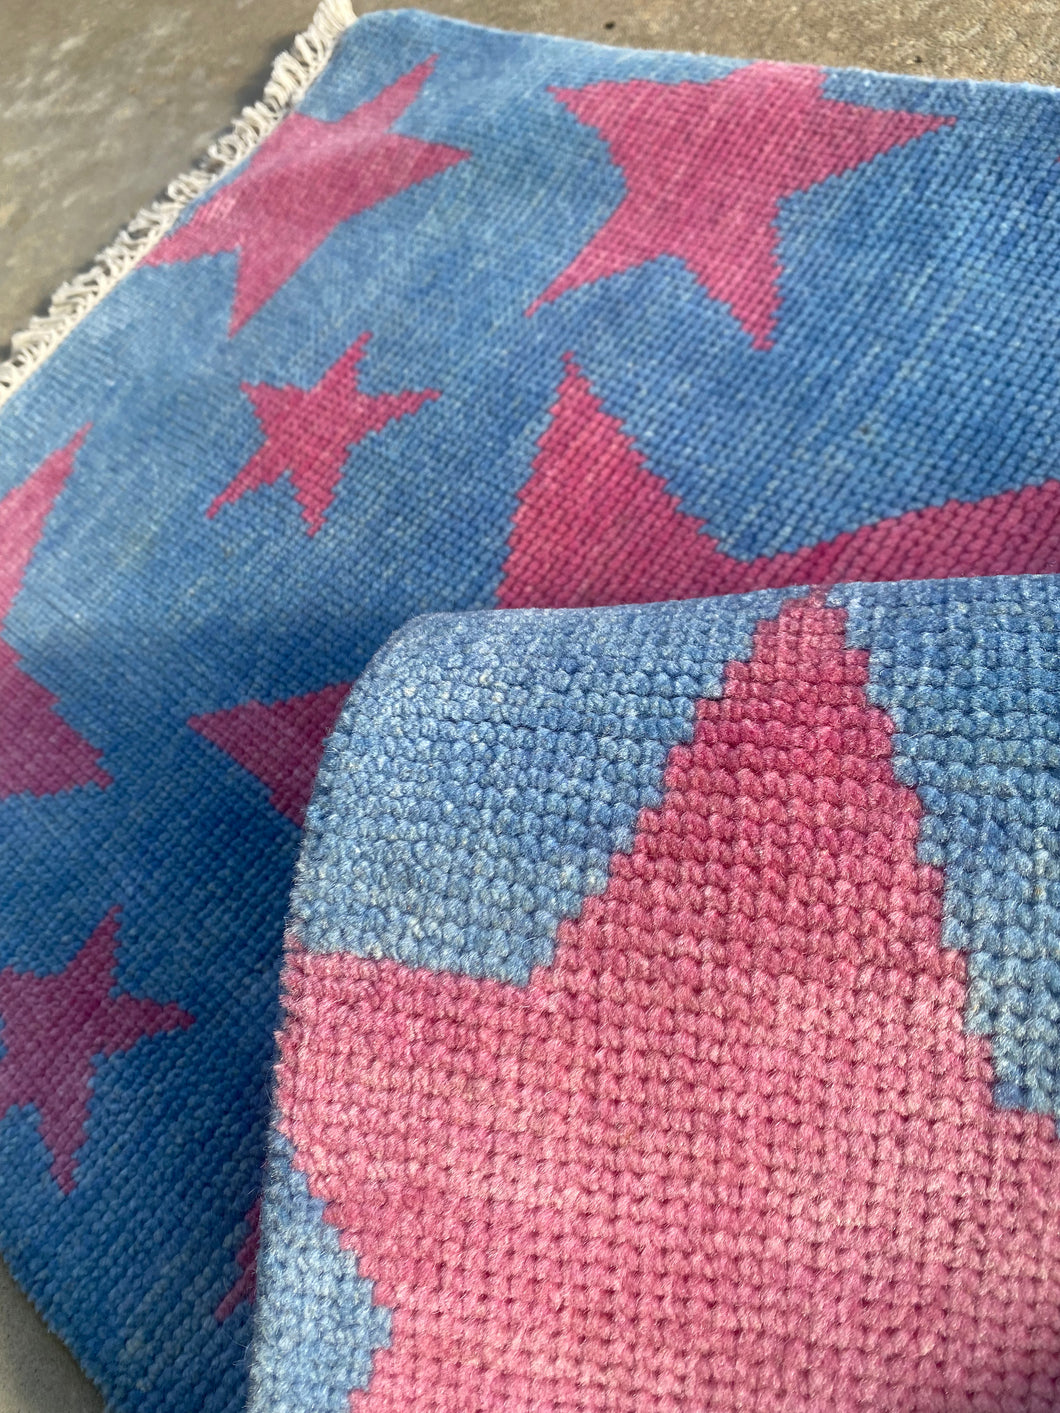 Cotton Candy Star rug